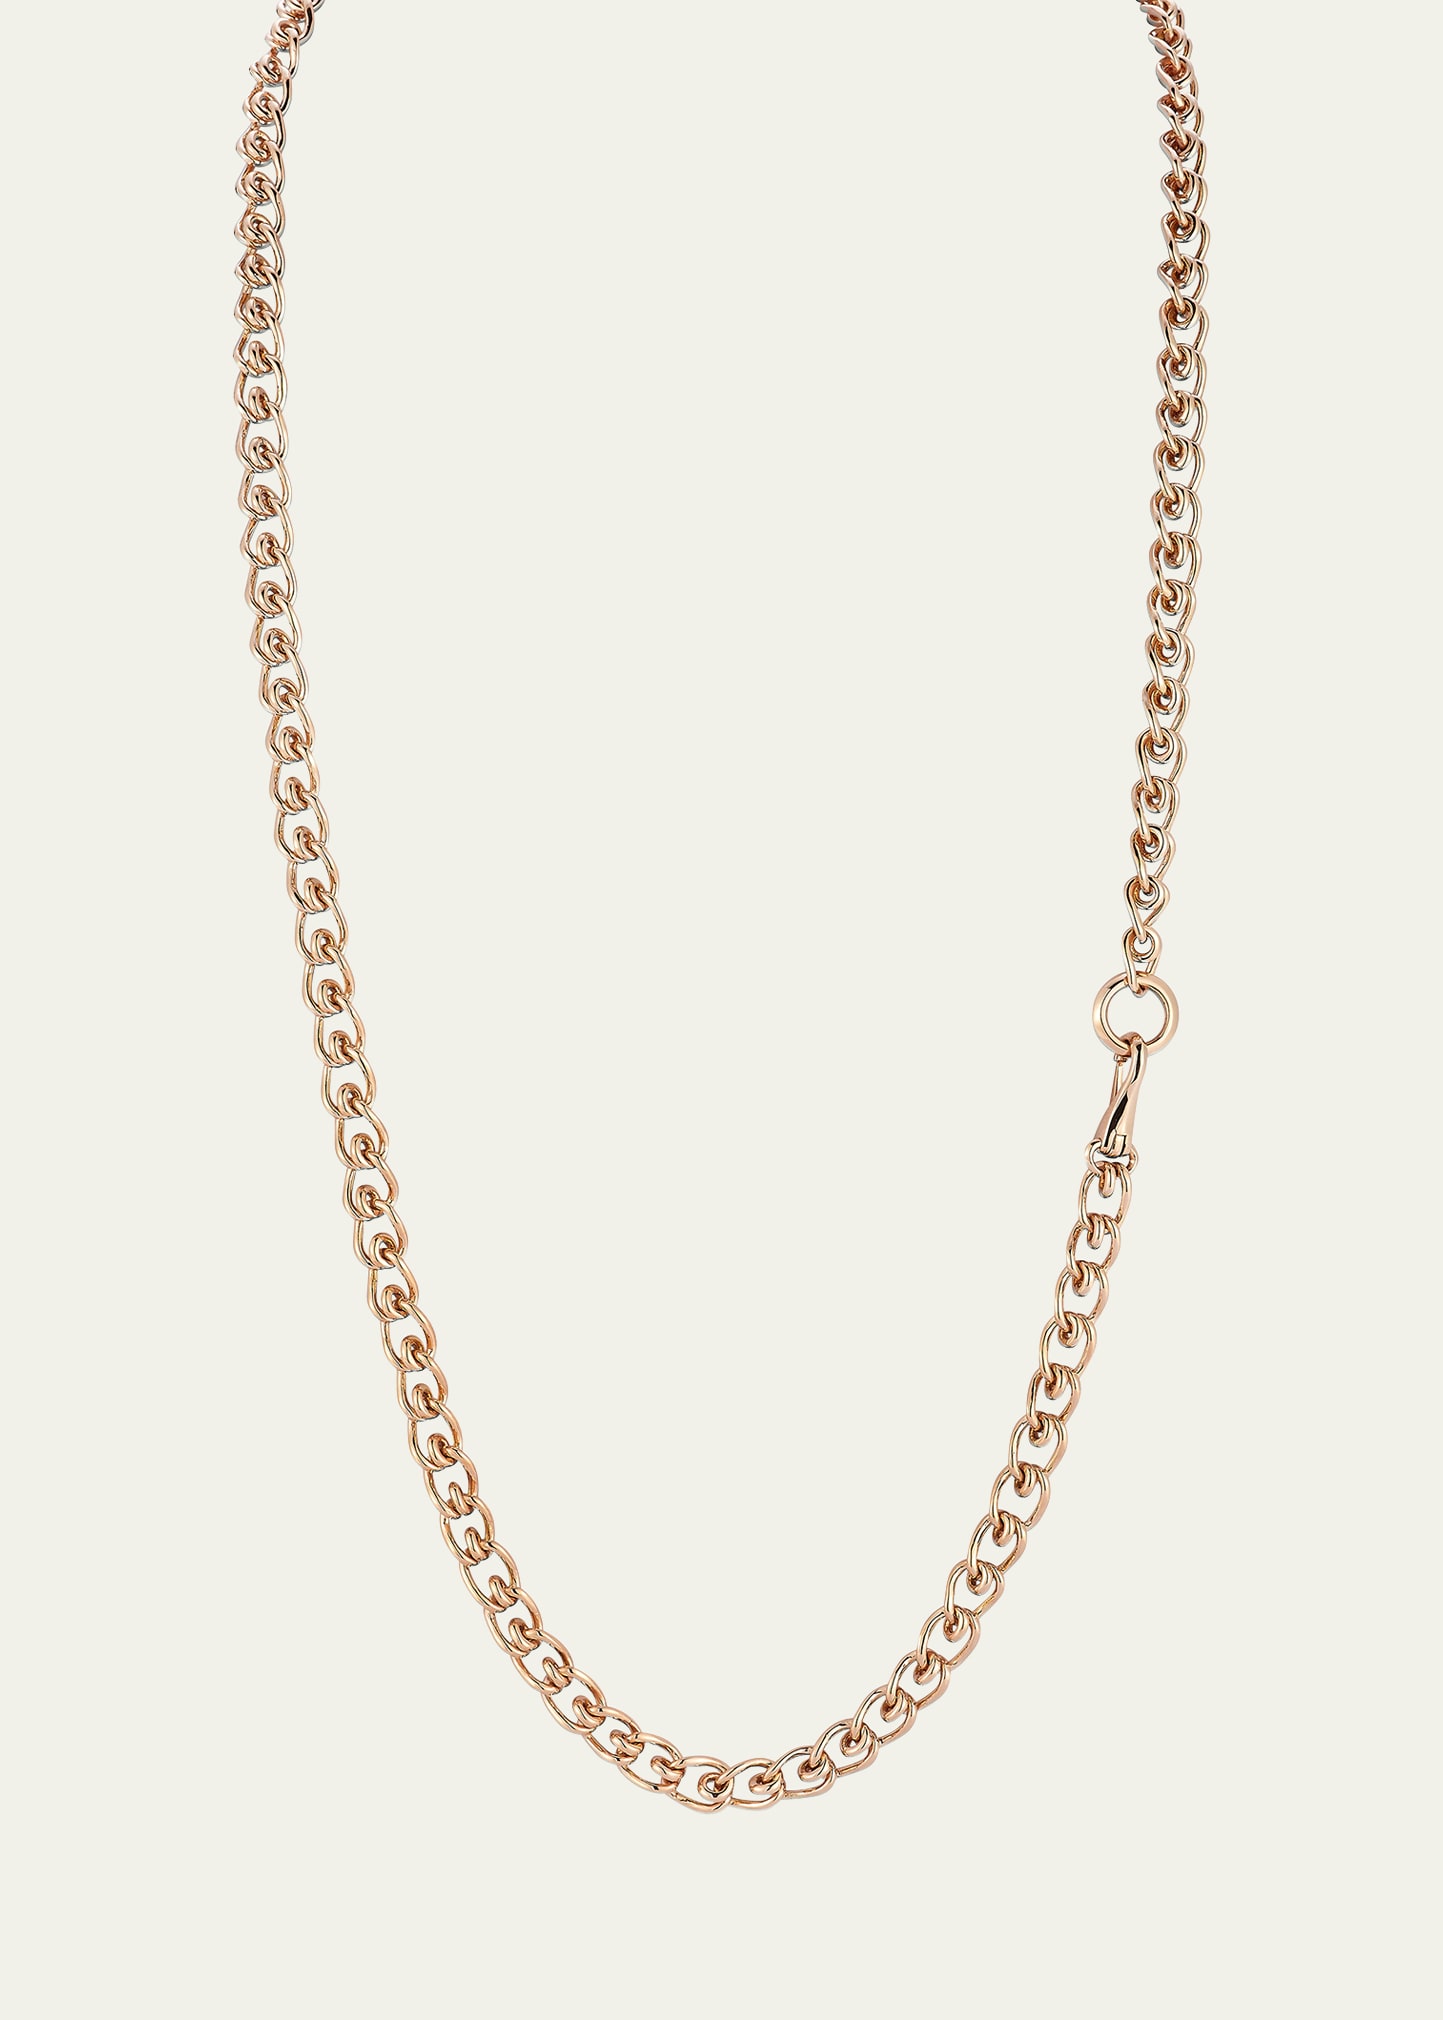 Huxley 18K Rose Gold Coil Chain Necklace